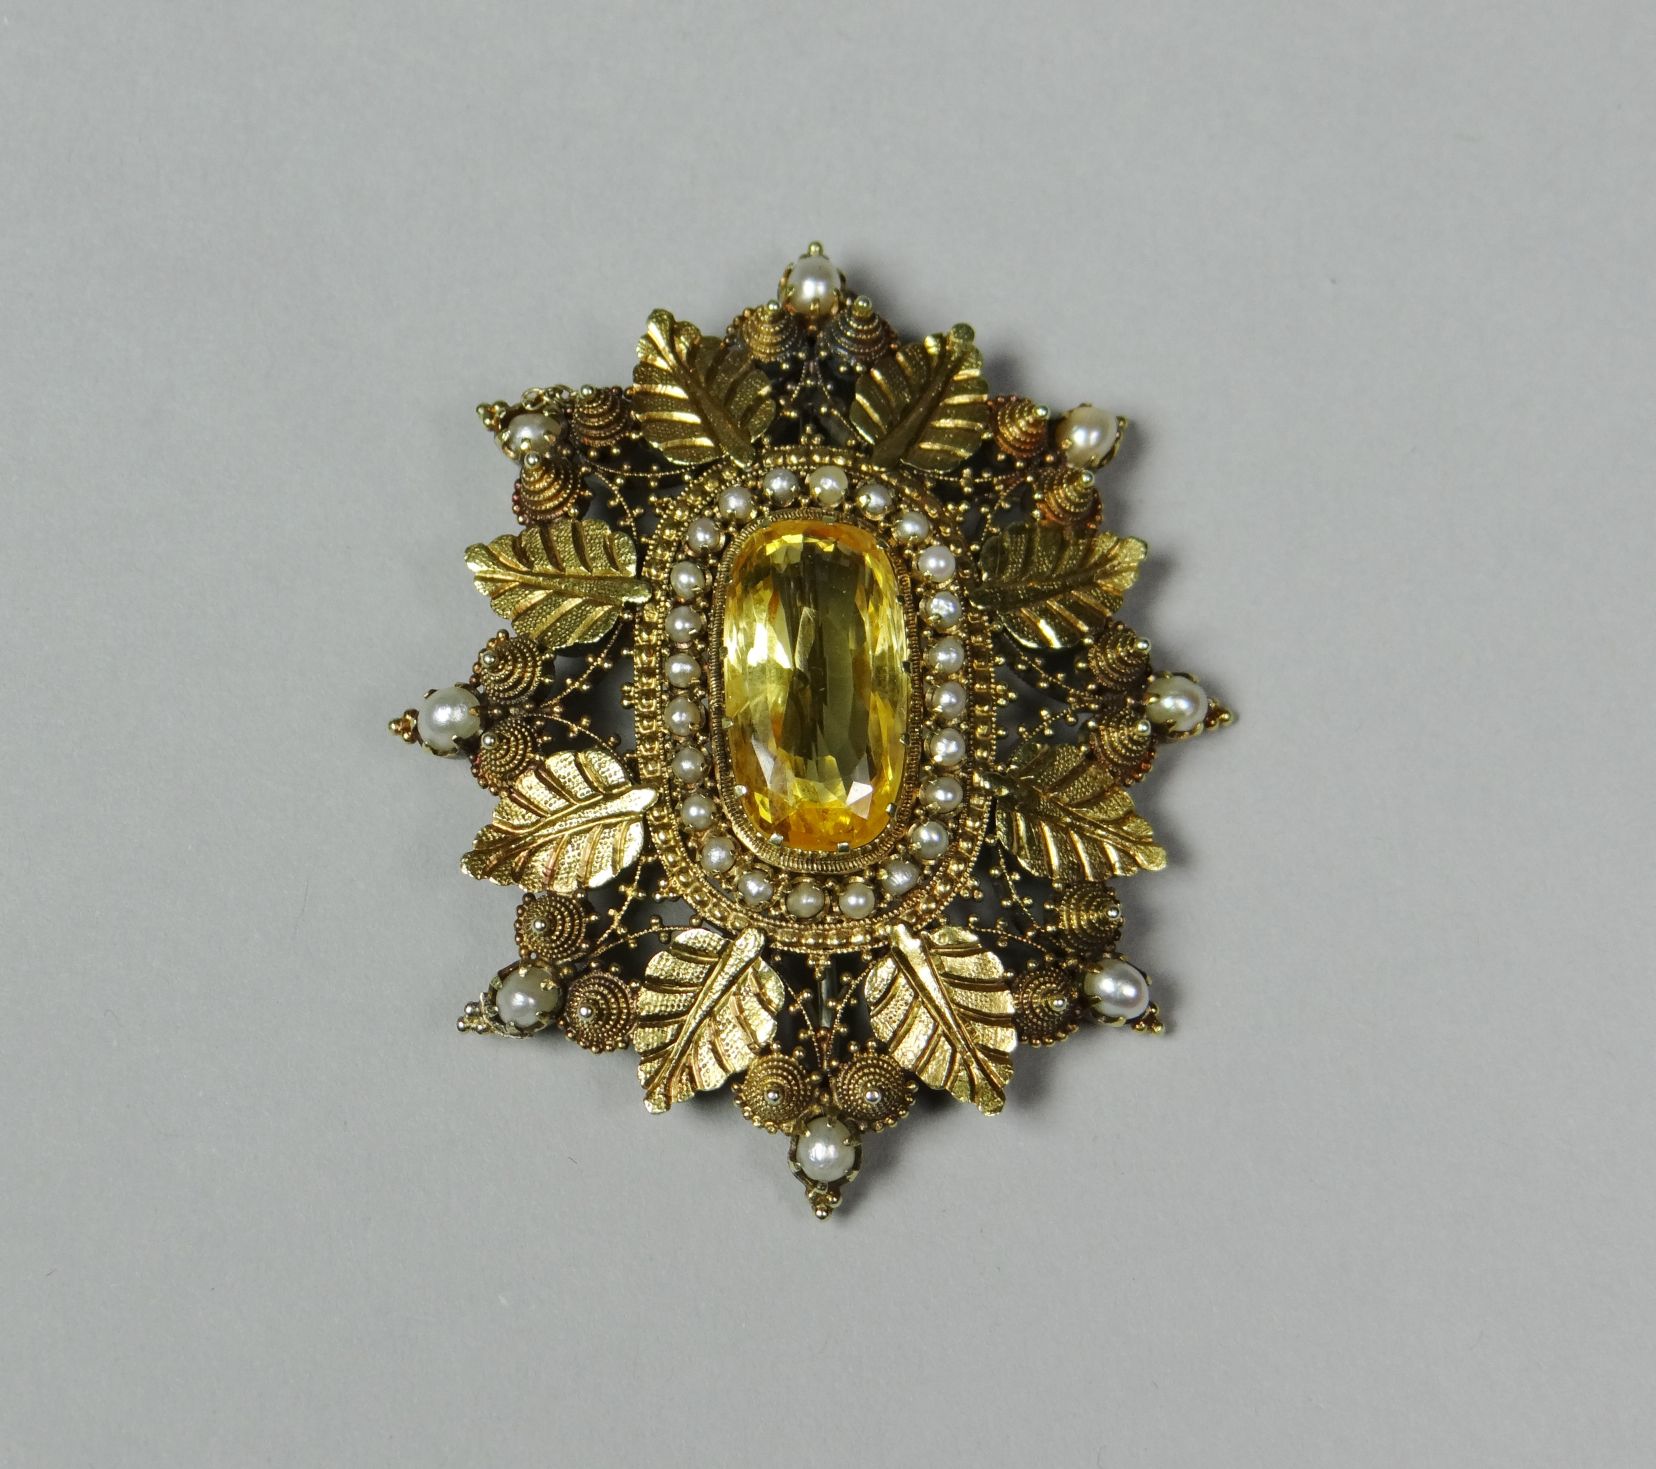 A fine quality yellow gold oval brooch of leaf and fruit design centred with a large oval yellow